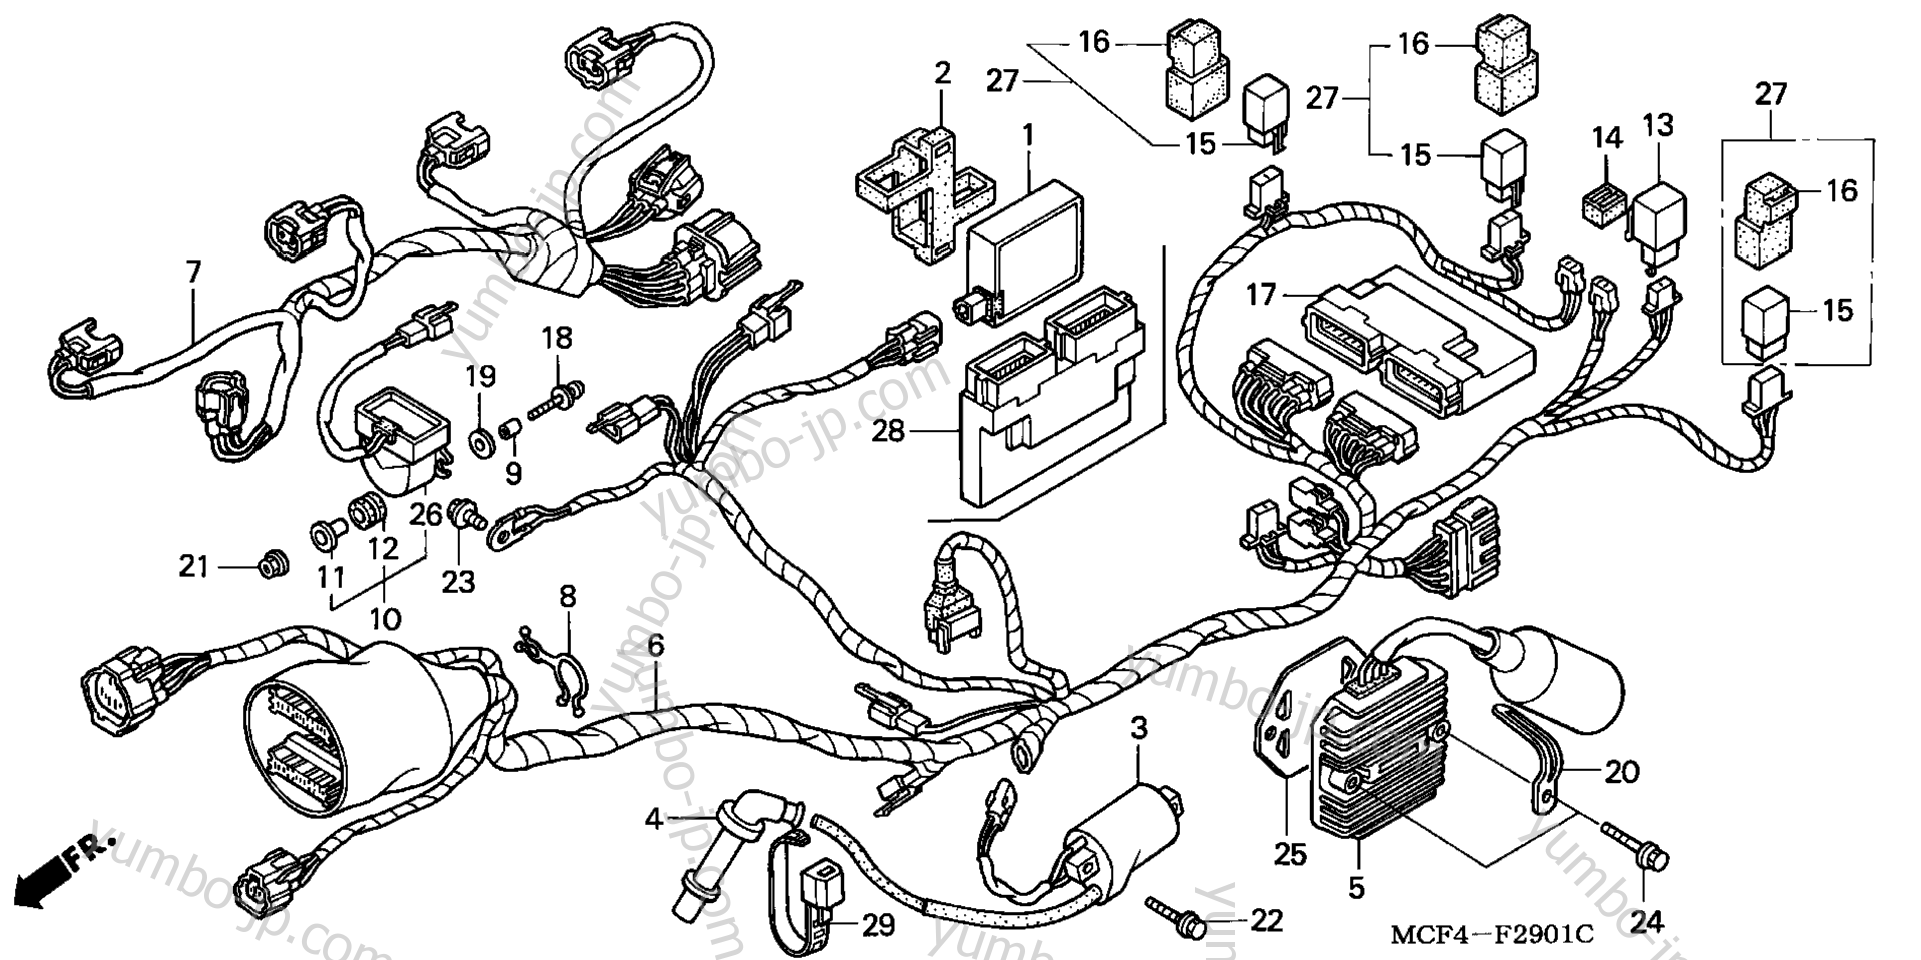 WIRE HARNESS (RR.) for motorcycles HONDA RVT1000R A 2001 year